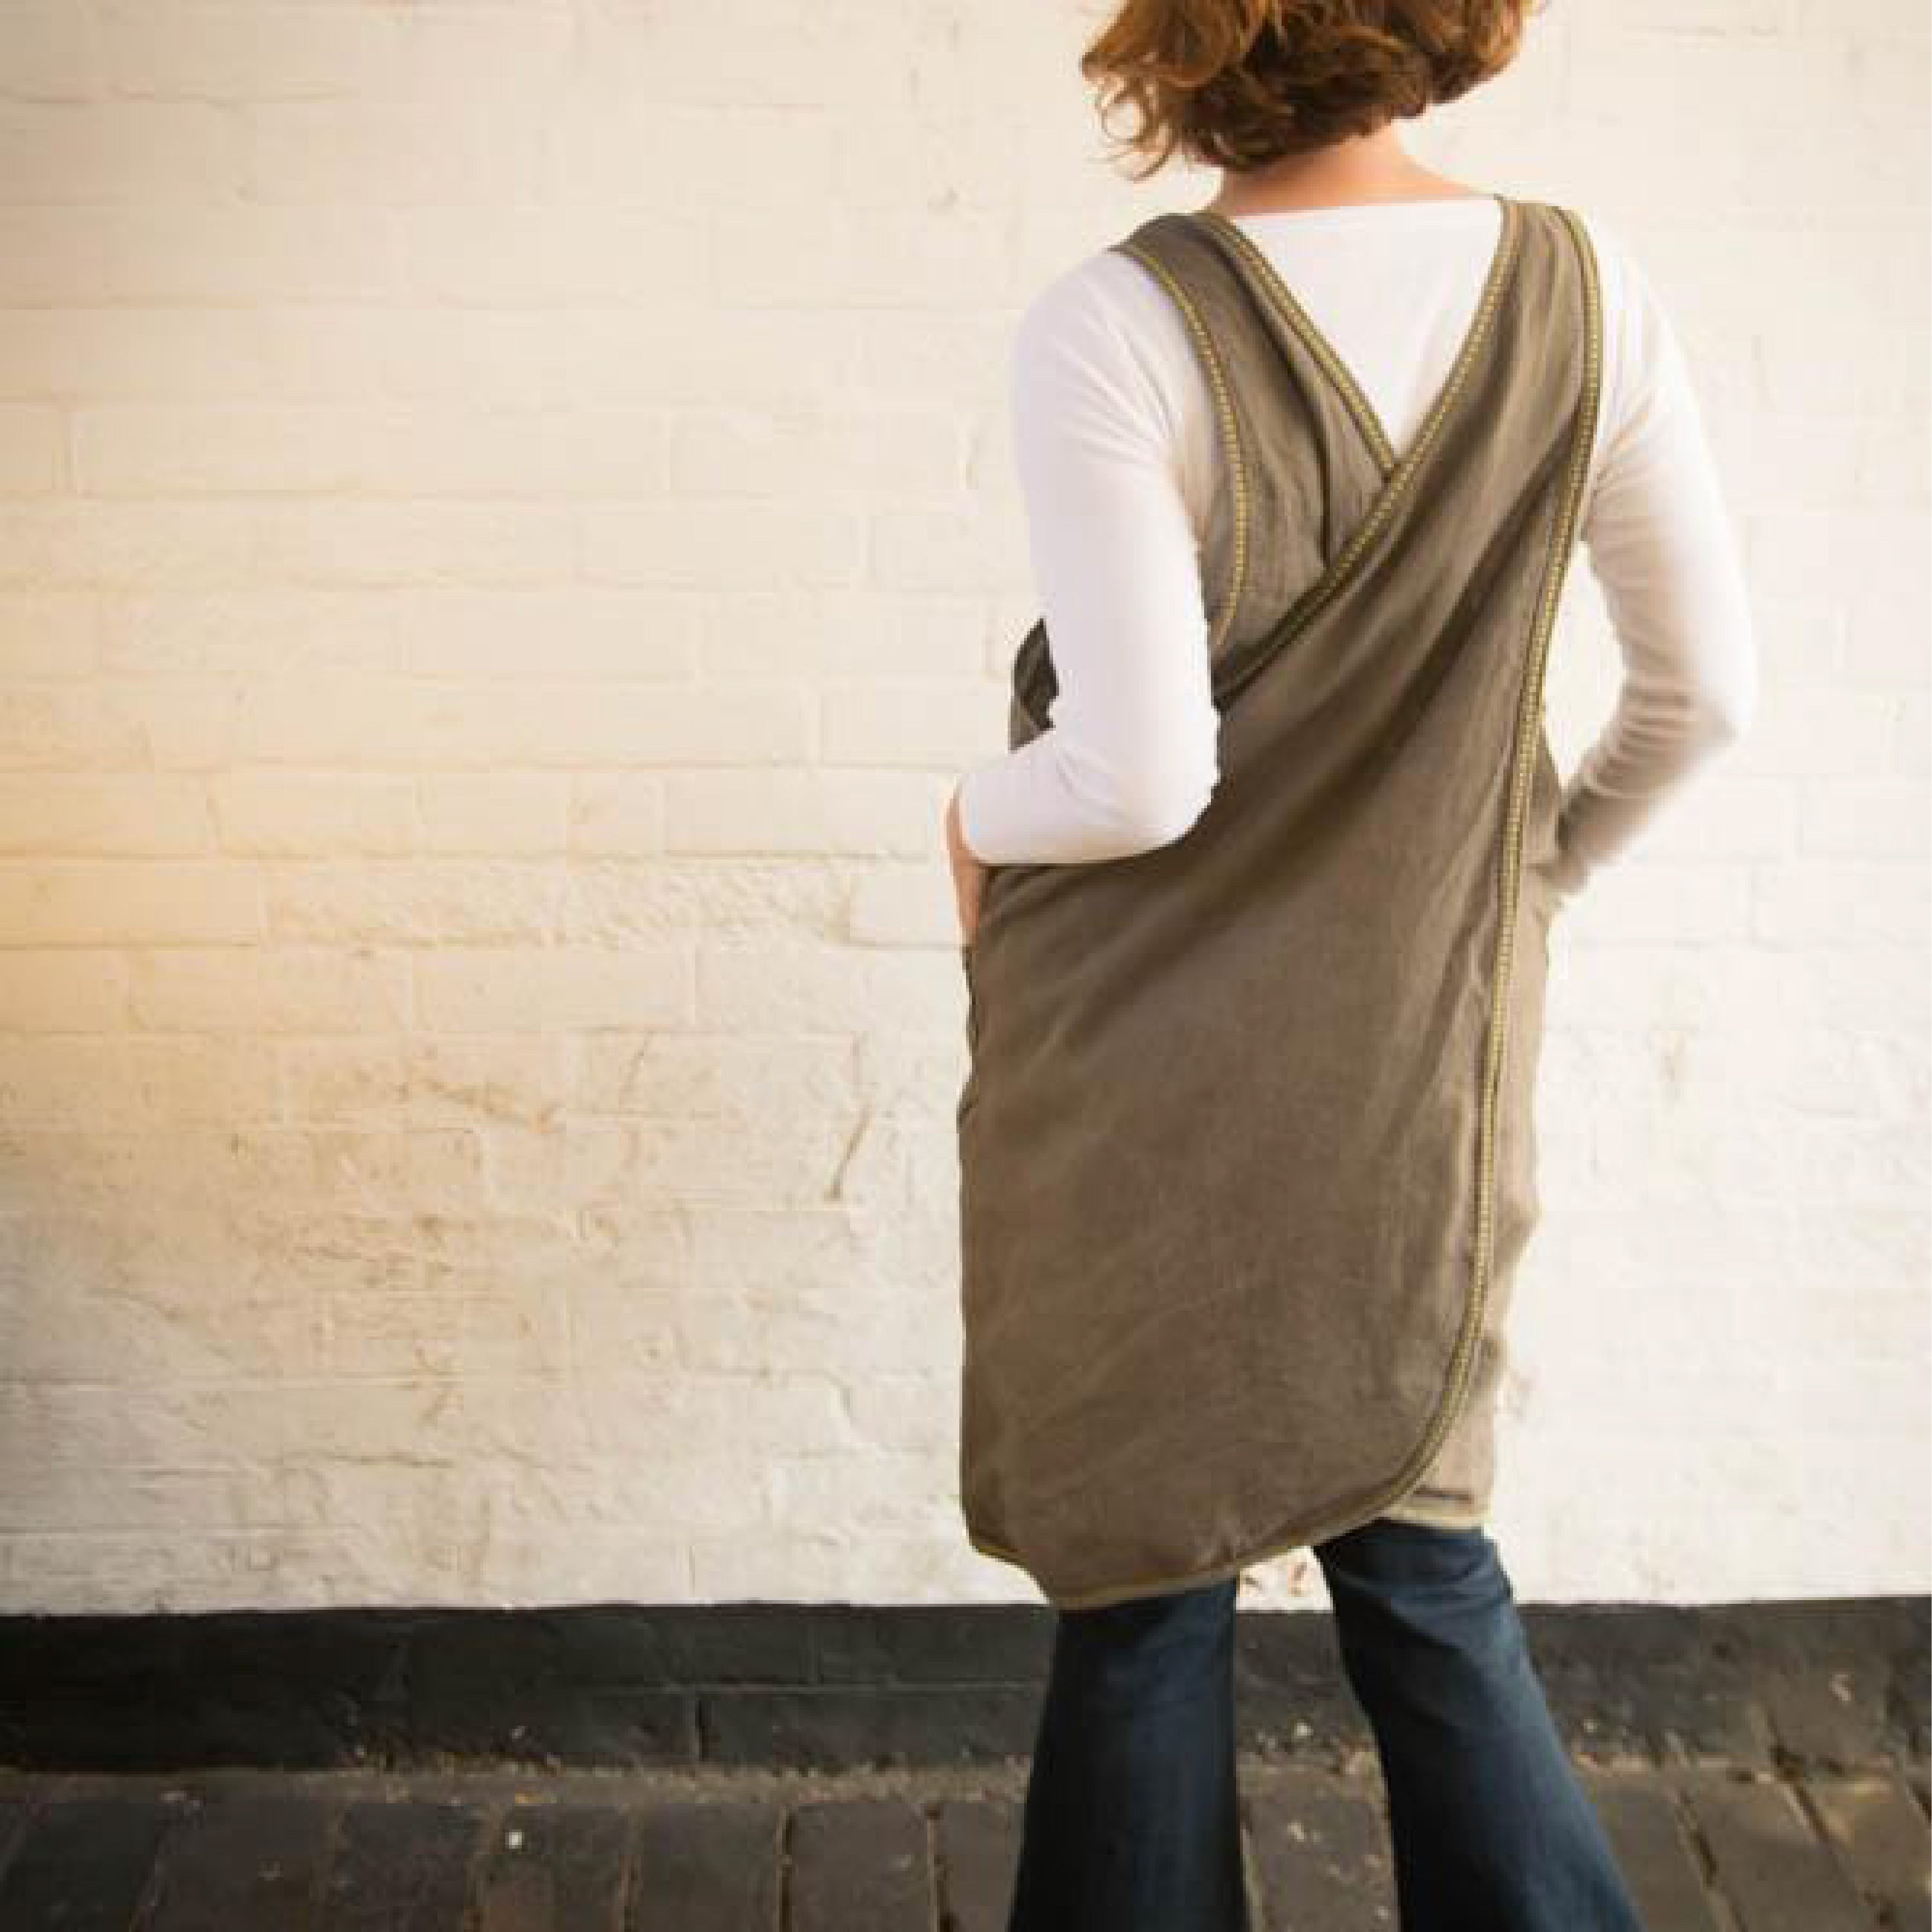 Lady wearing The Beatrice Pinafore Sewing Pattern in A brown fabric